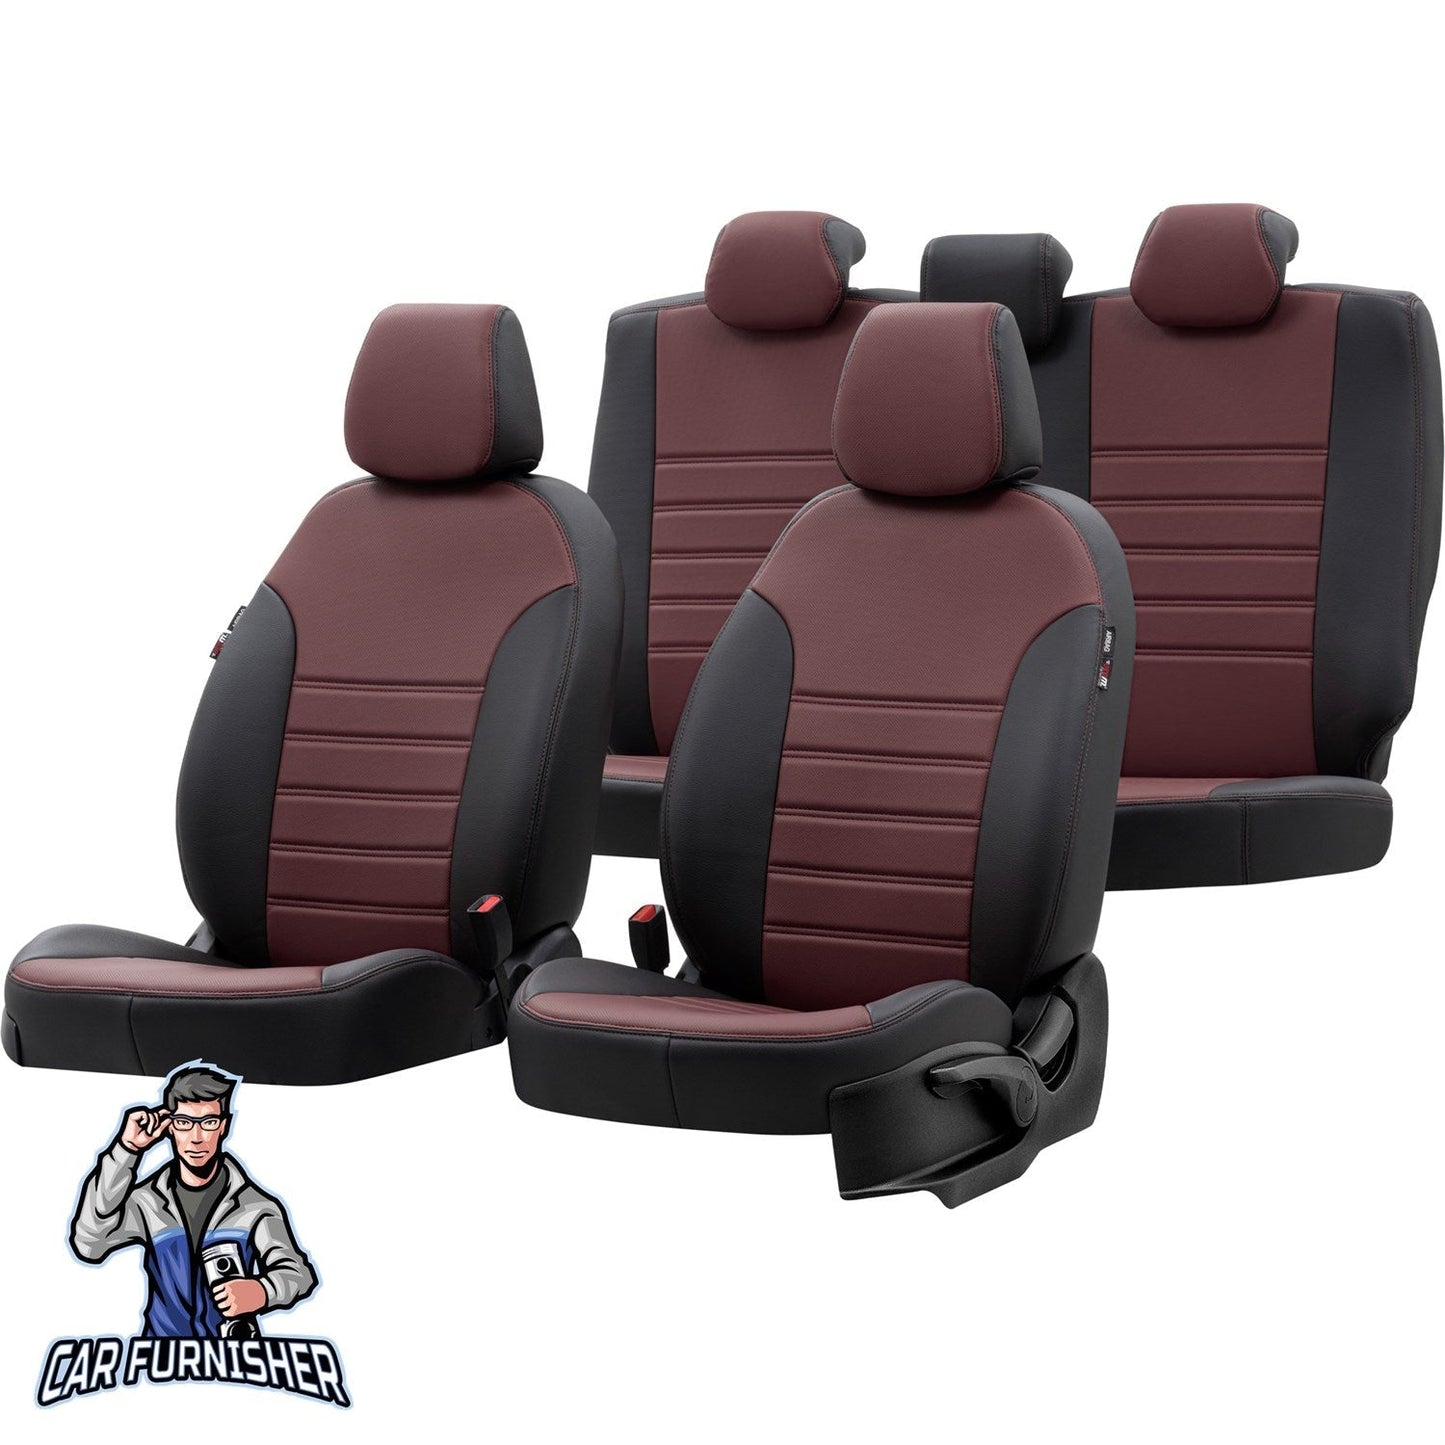 Honda HRV Seat Covers Istanbul Leather Design Burgundy Leather